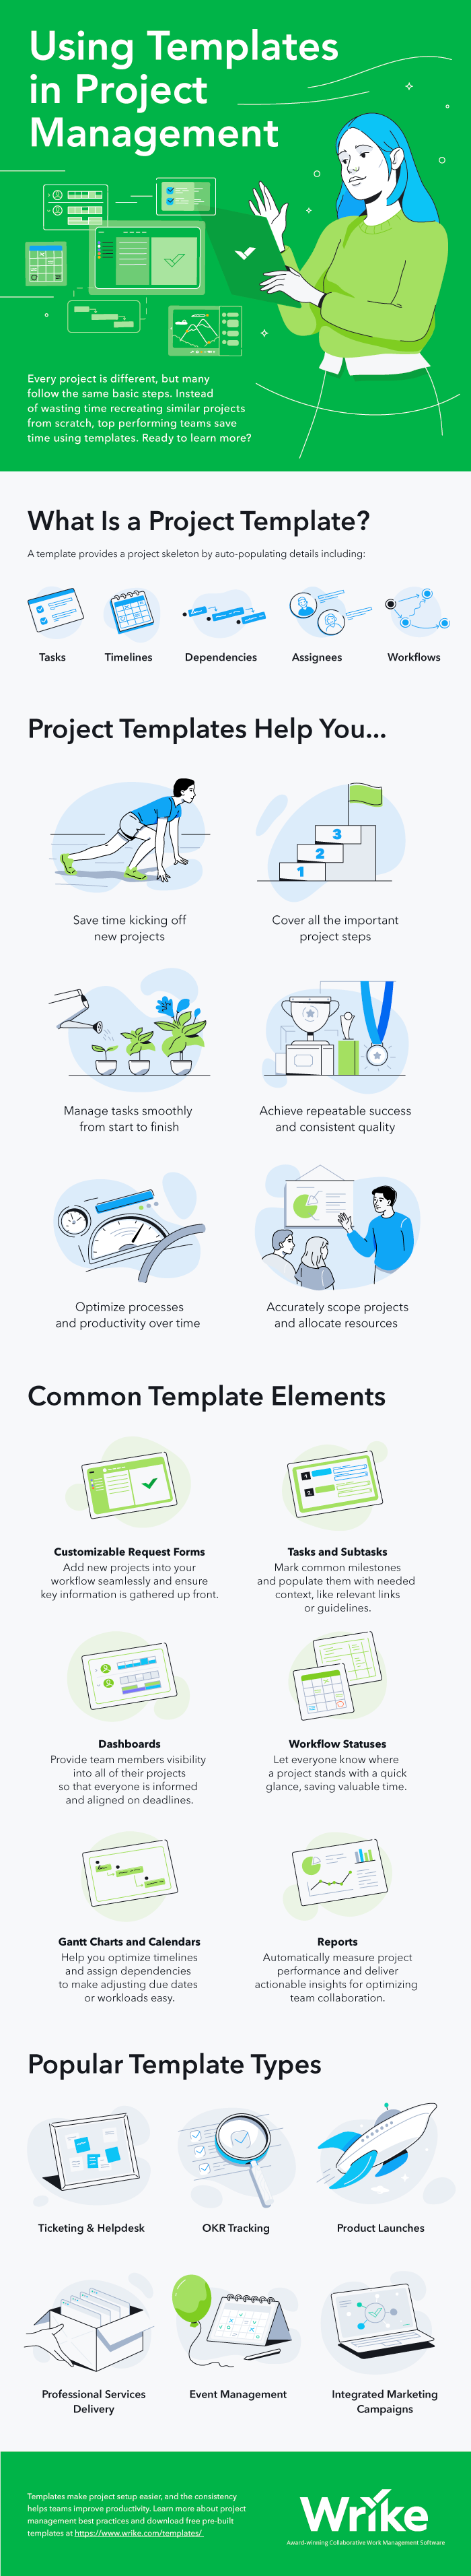 Using Templates in Project Management Infographic 2